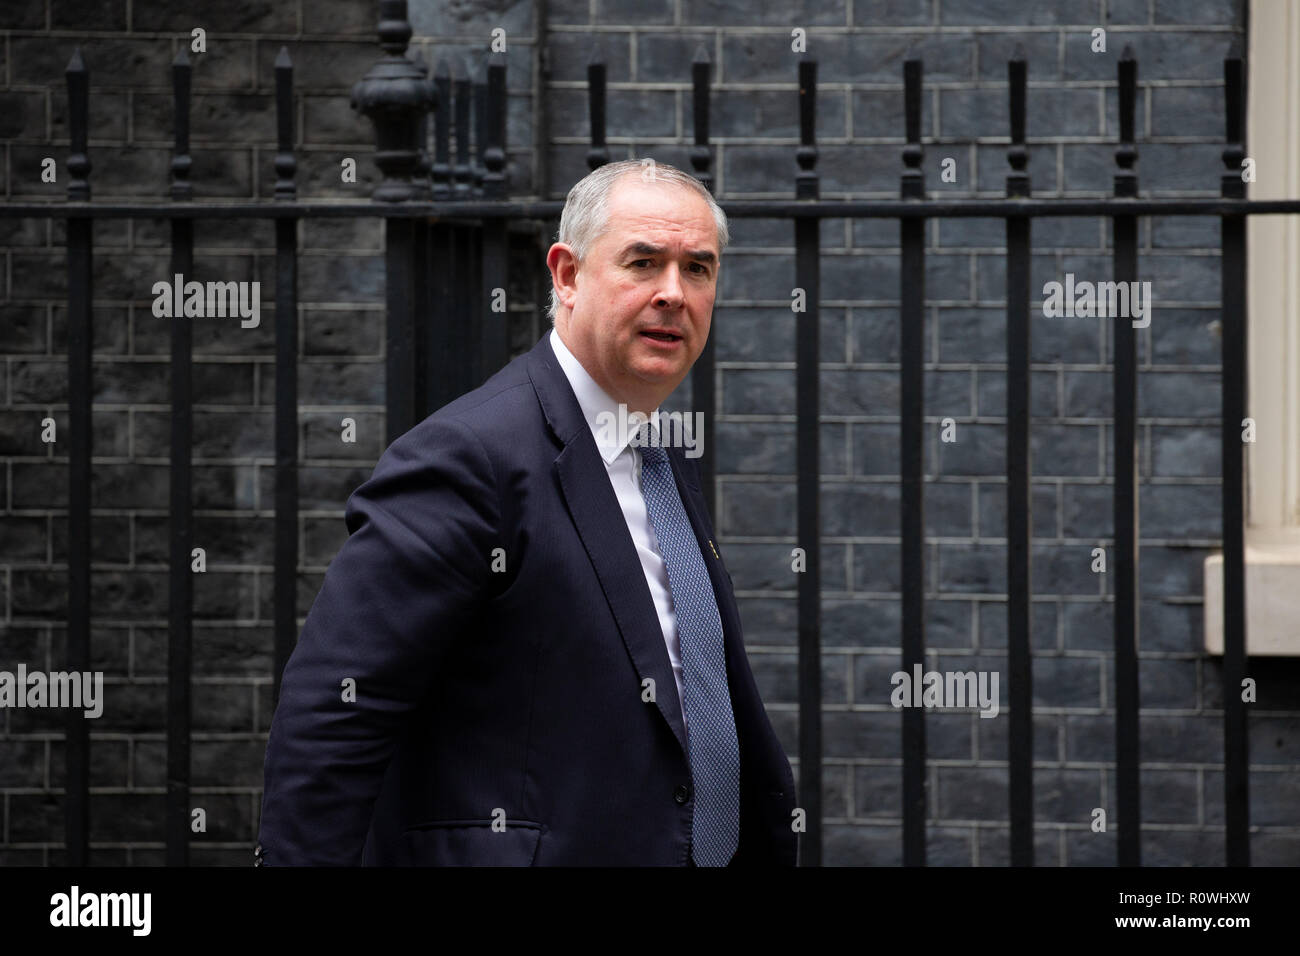 Geoffrey Cox, Attorney General, arrives in Downing Street for a Cabinet meeting.The Cabinet will discuss the plans for Brexit. Stock Photo